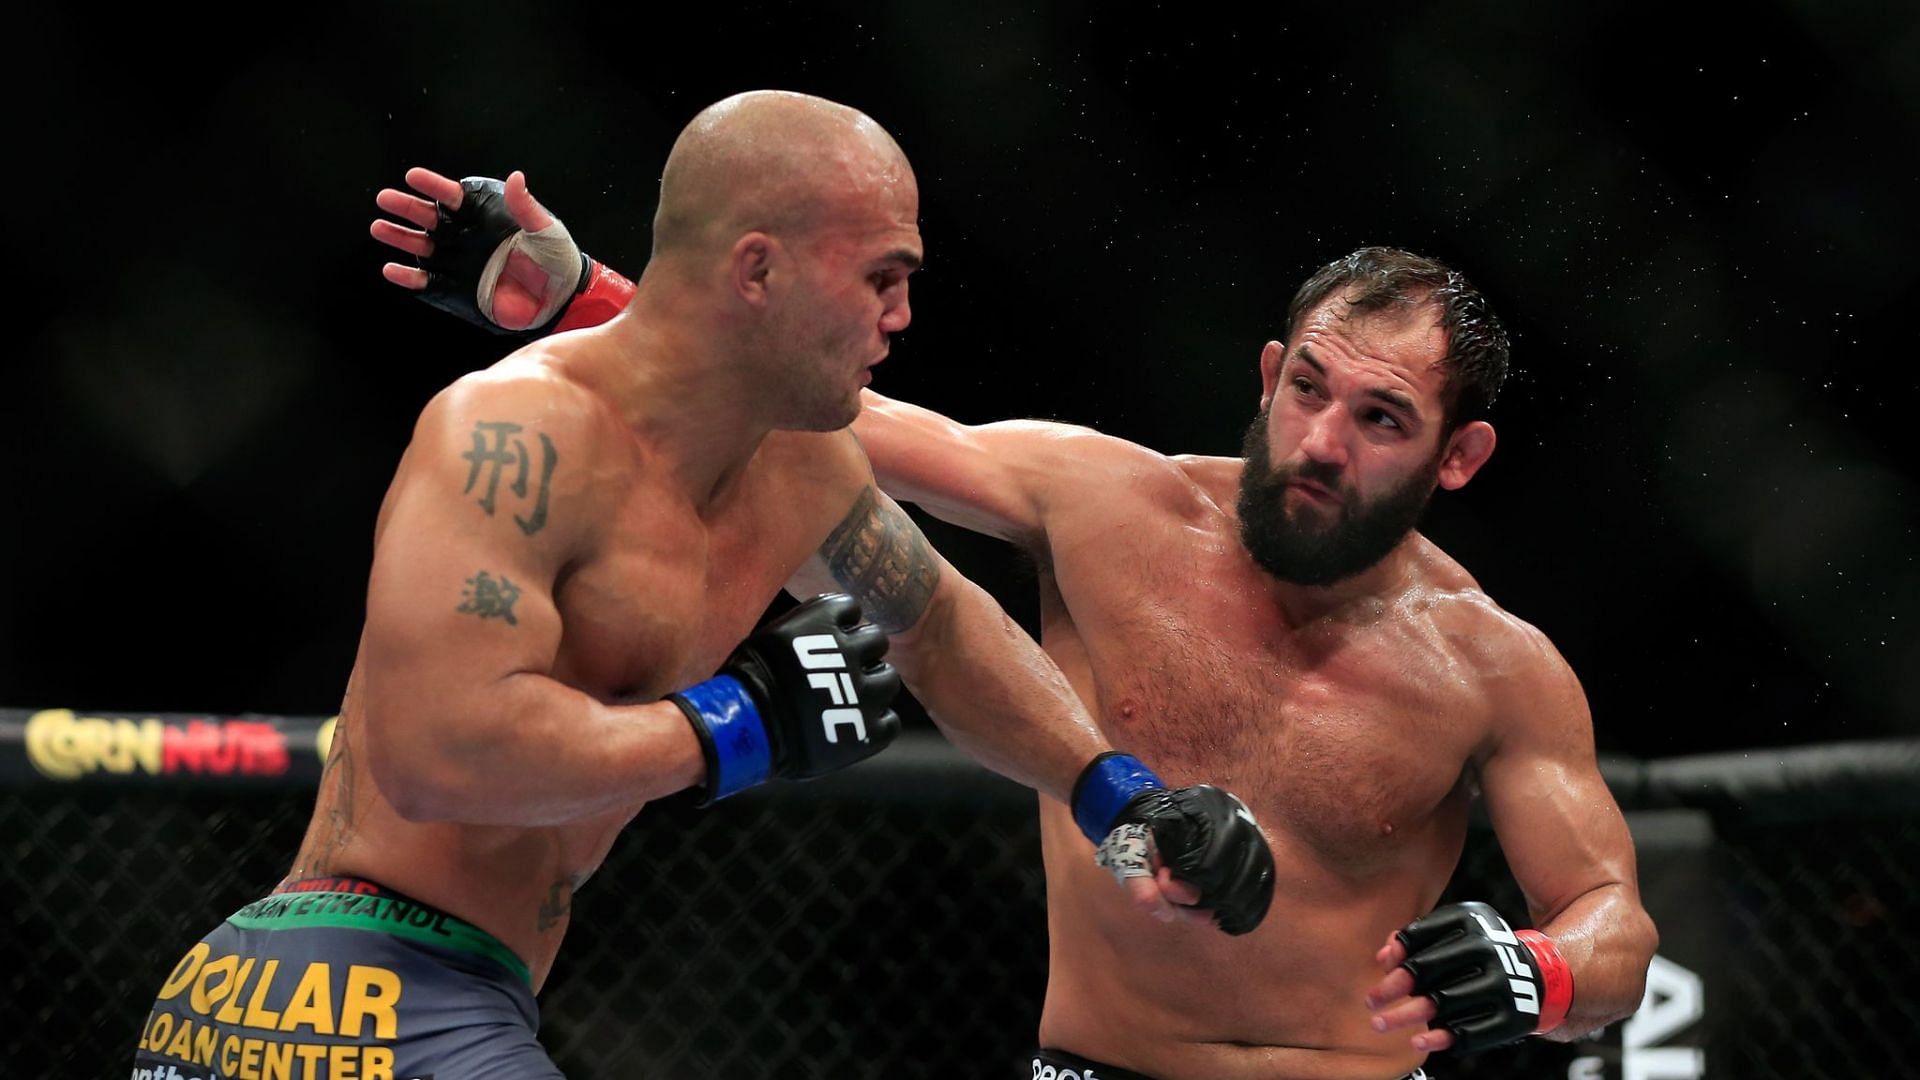 Robbie Lawler&#039;s second clash with Johny Hendricks was even better than their first meeting